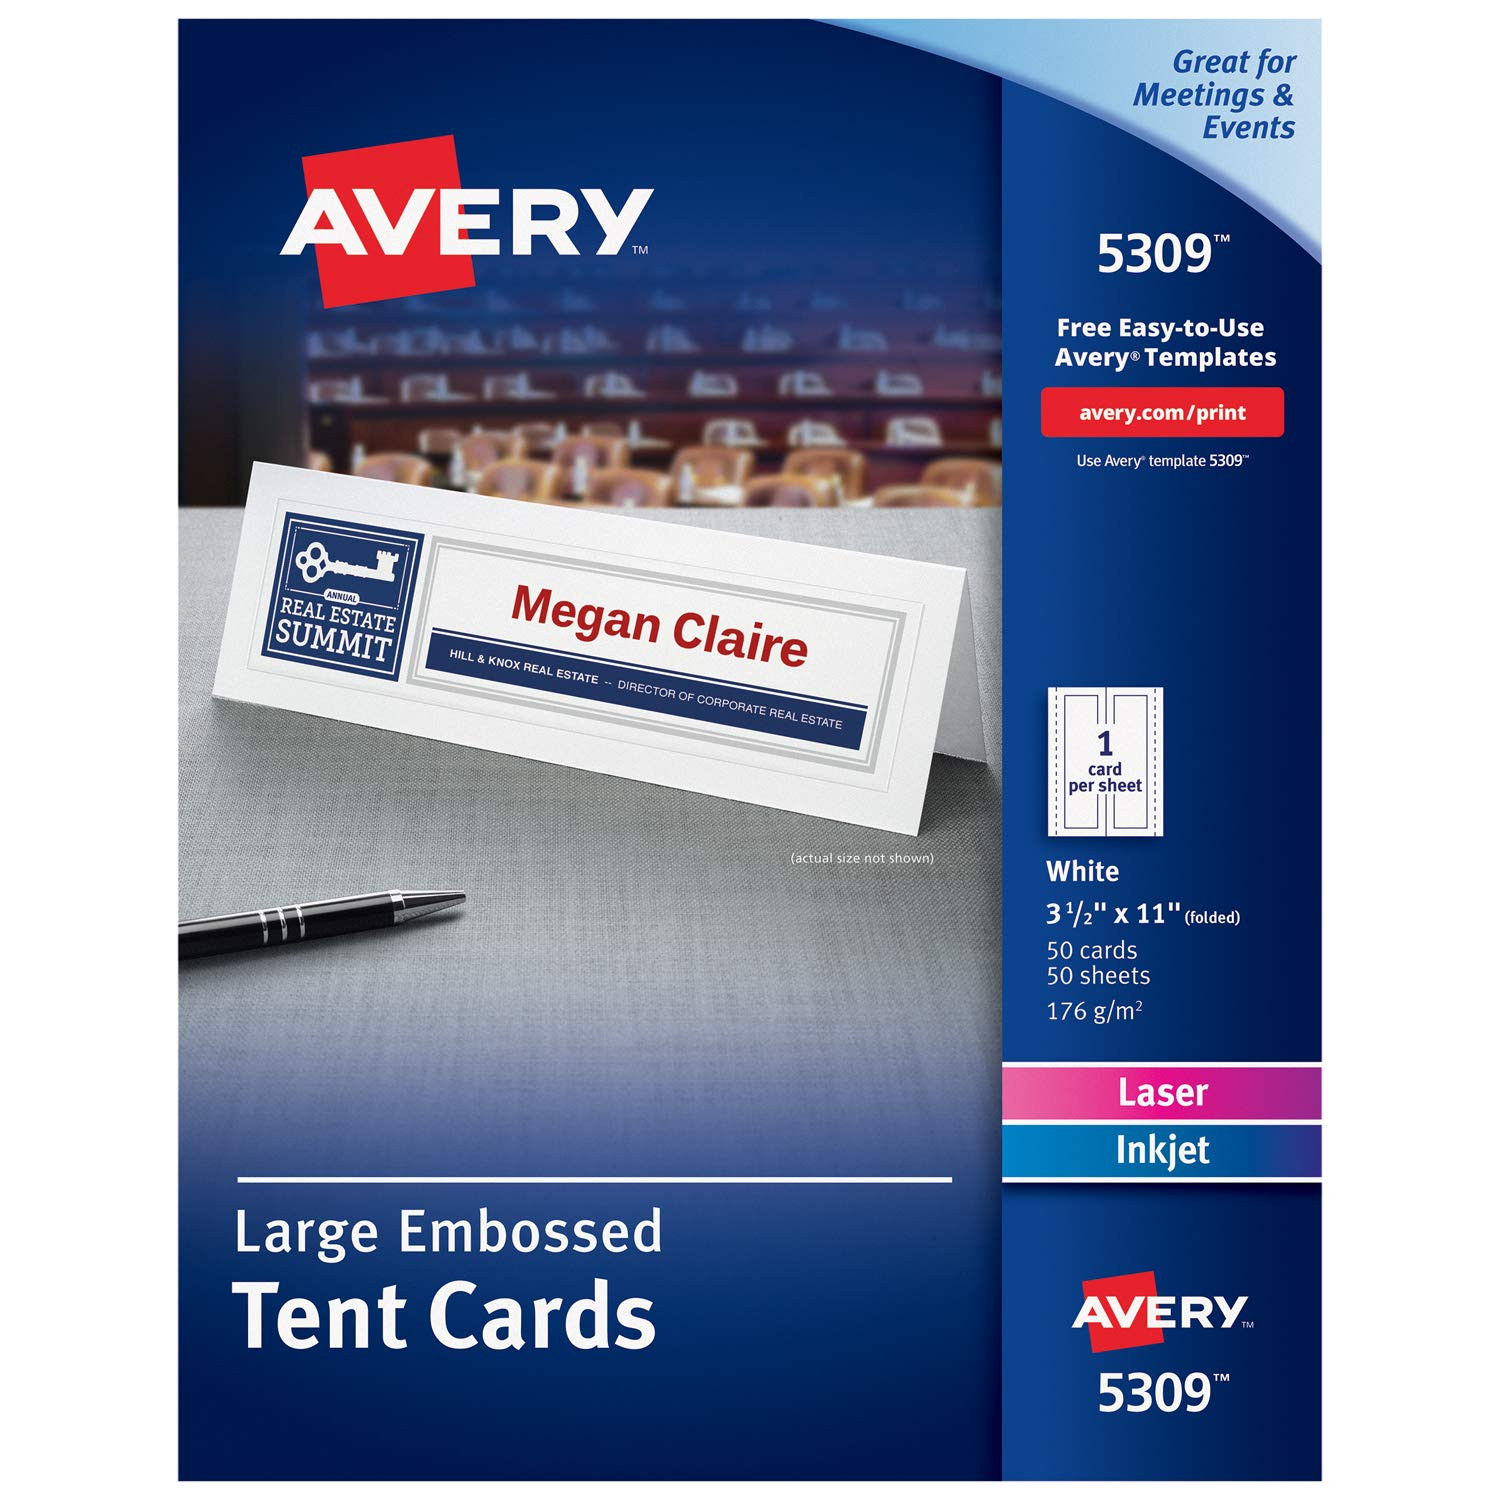 Avery Printable Tent Cards Laser &amp; Inkjet Printers 50 Cards 3 5 X 11 5309 White Of Avery Business Cards Templates Free